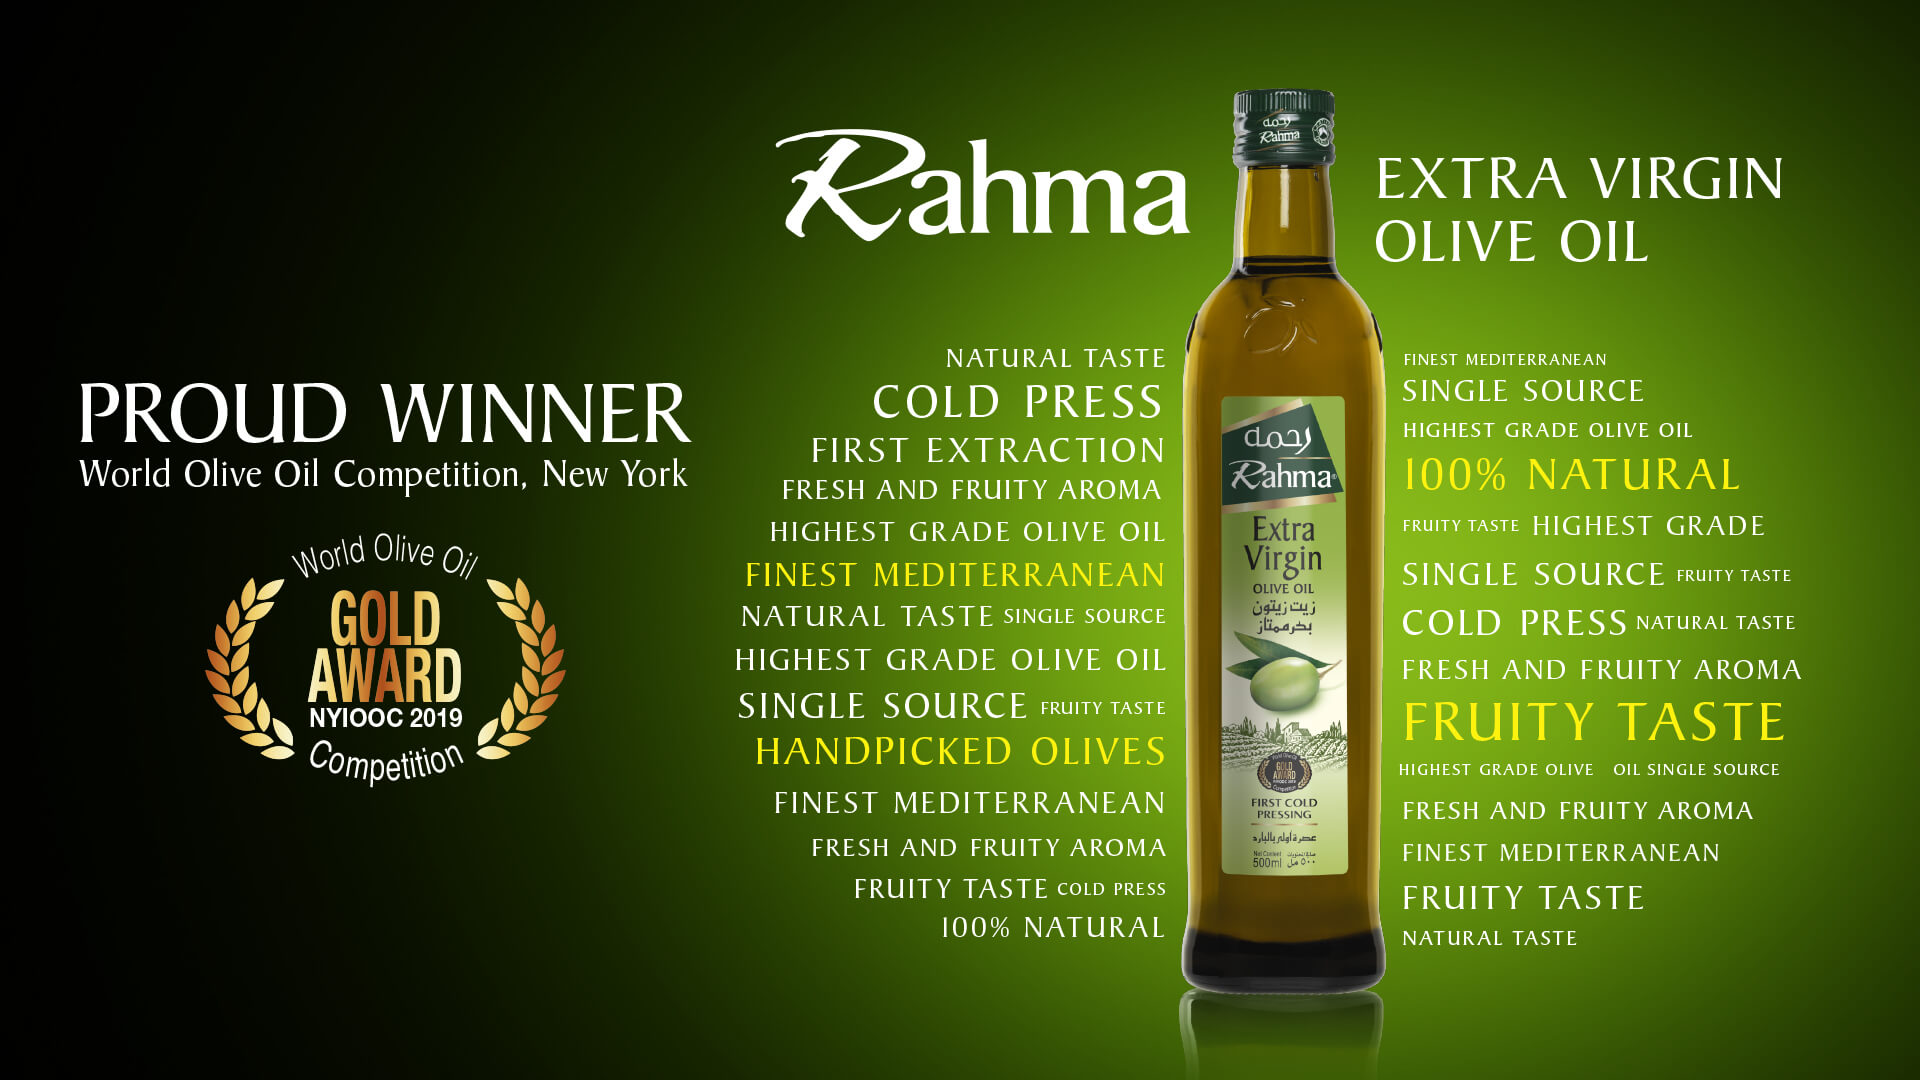 Rahma Extra Virgin Olive Oil wins Gold award at the most prestigious olive oil competition